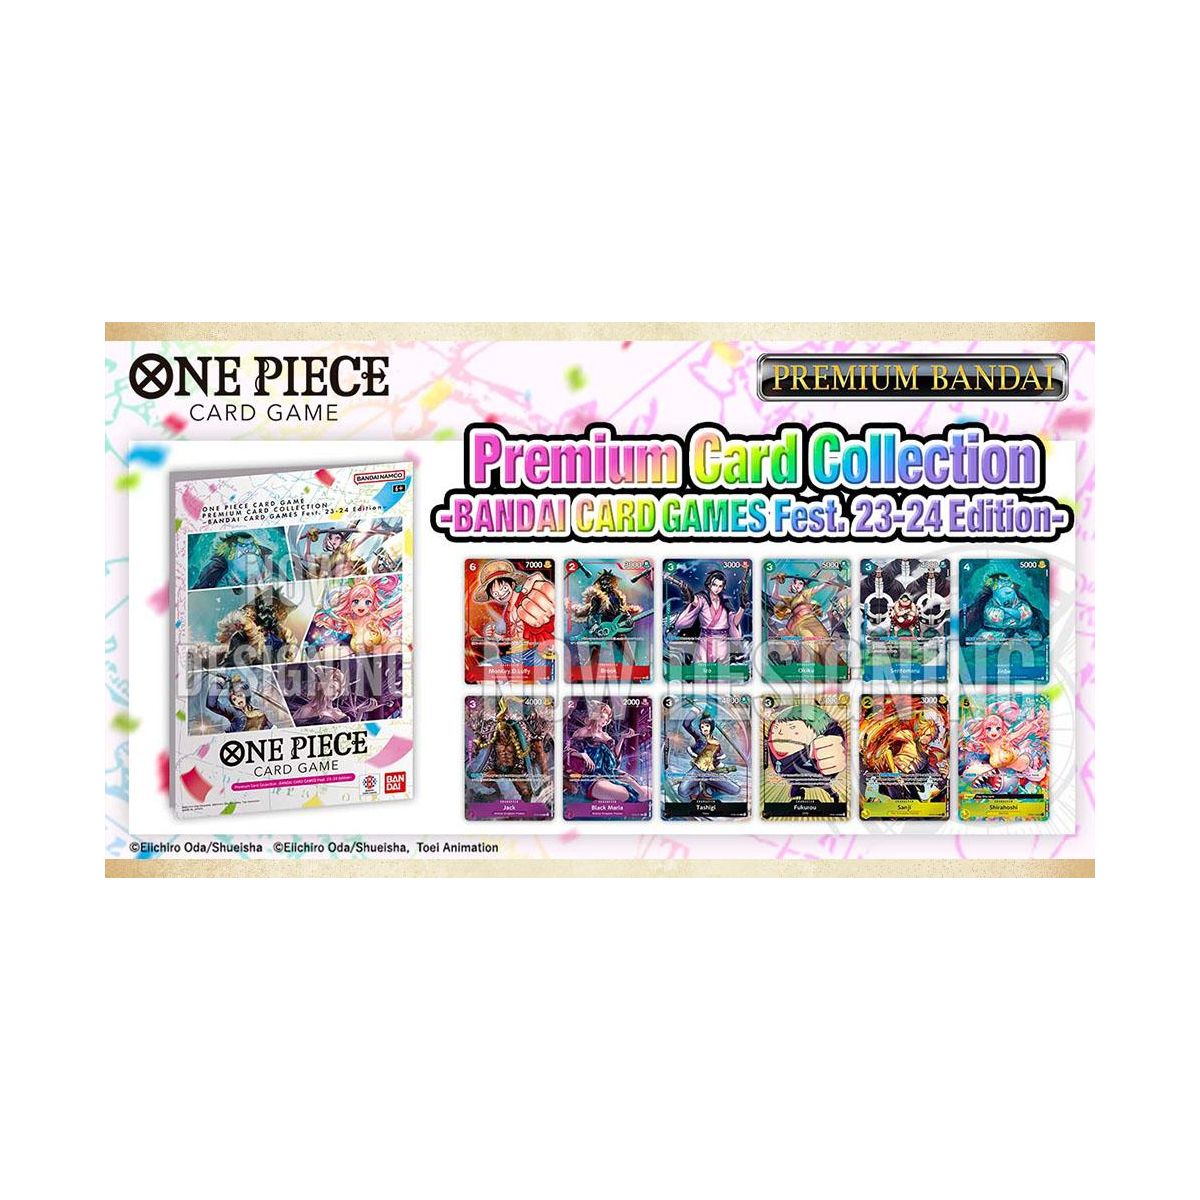 One Piece Card Game - Premium Card Collection - BANDAI CARD GAMES Fest. 23-24 Edition - English